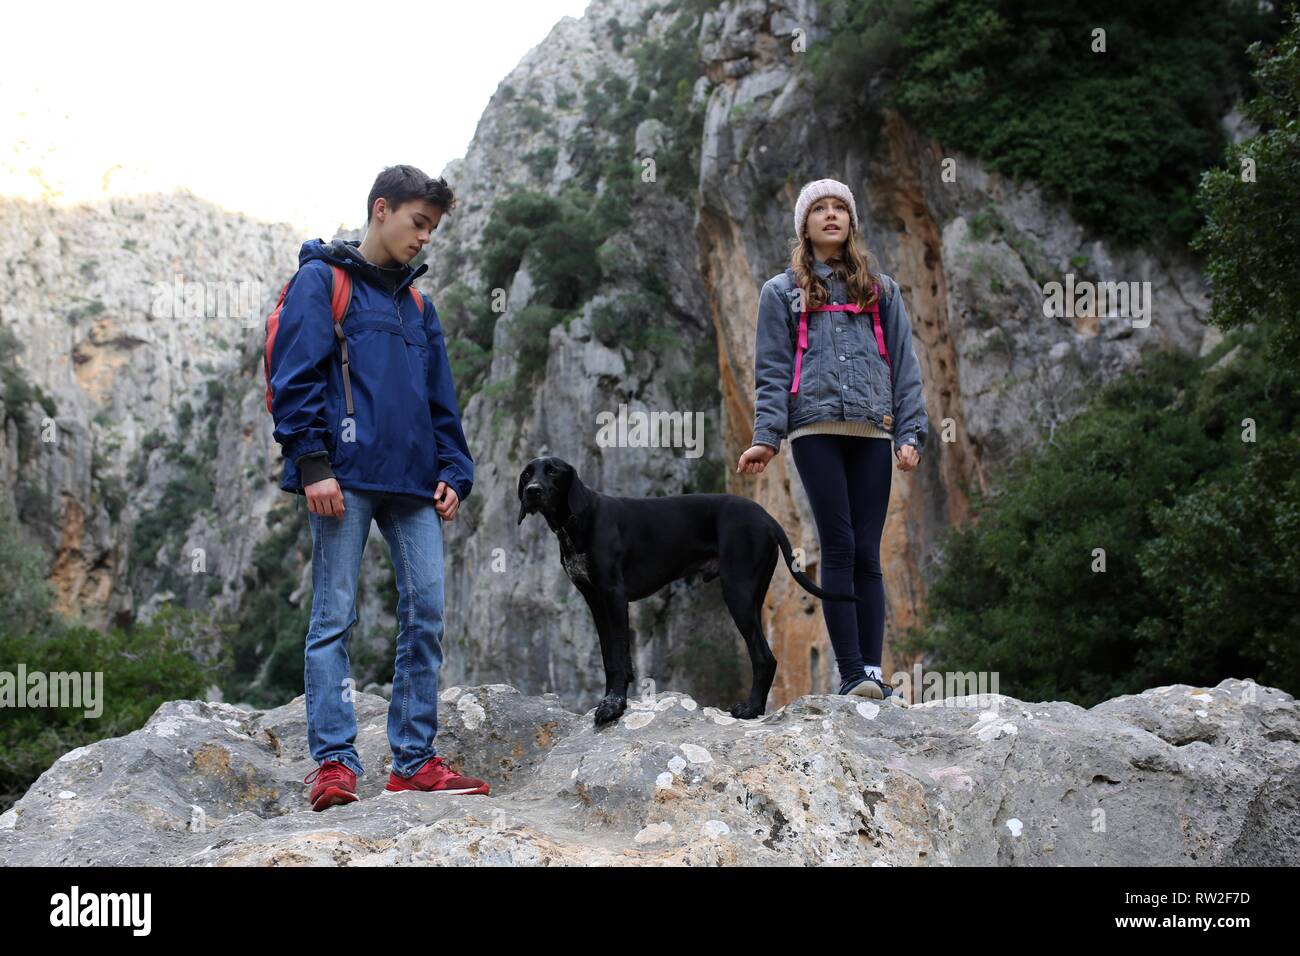 Children hiking with dog in mountain landscape, outdoor adventure Stock Photo